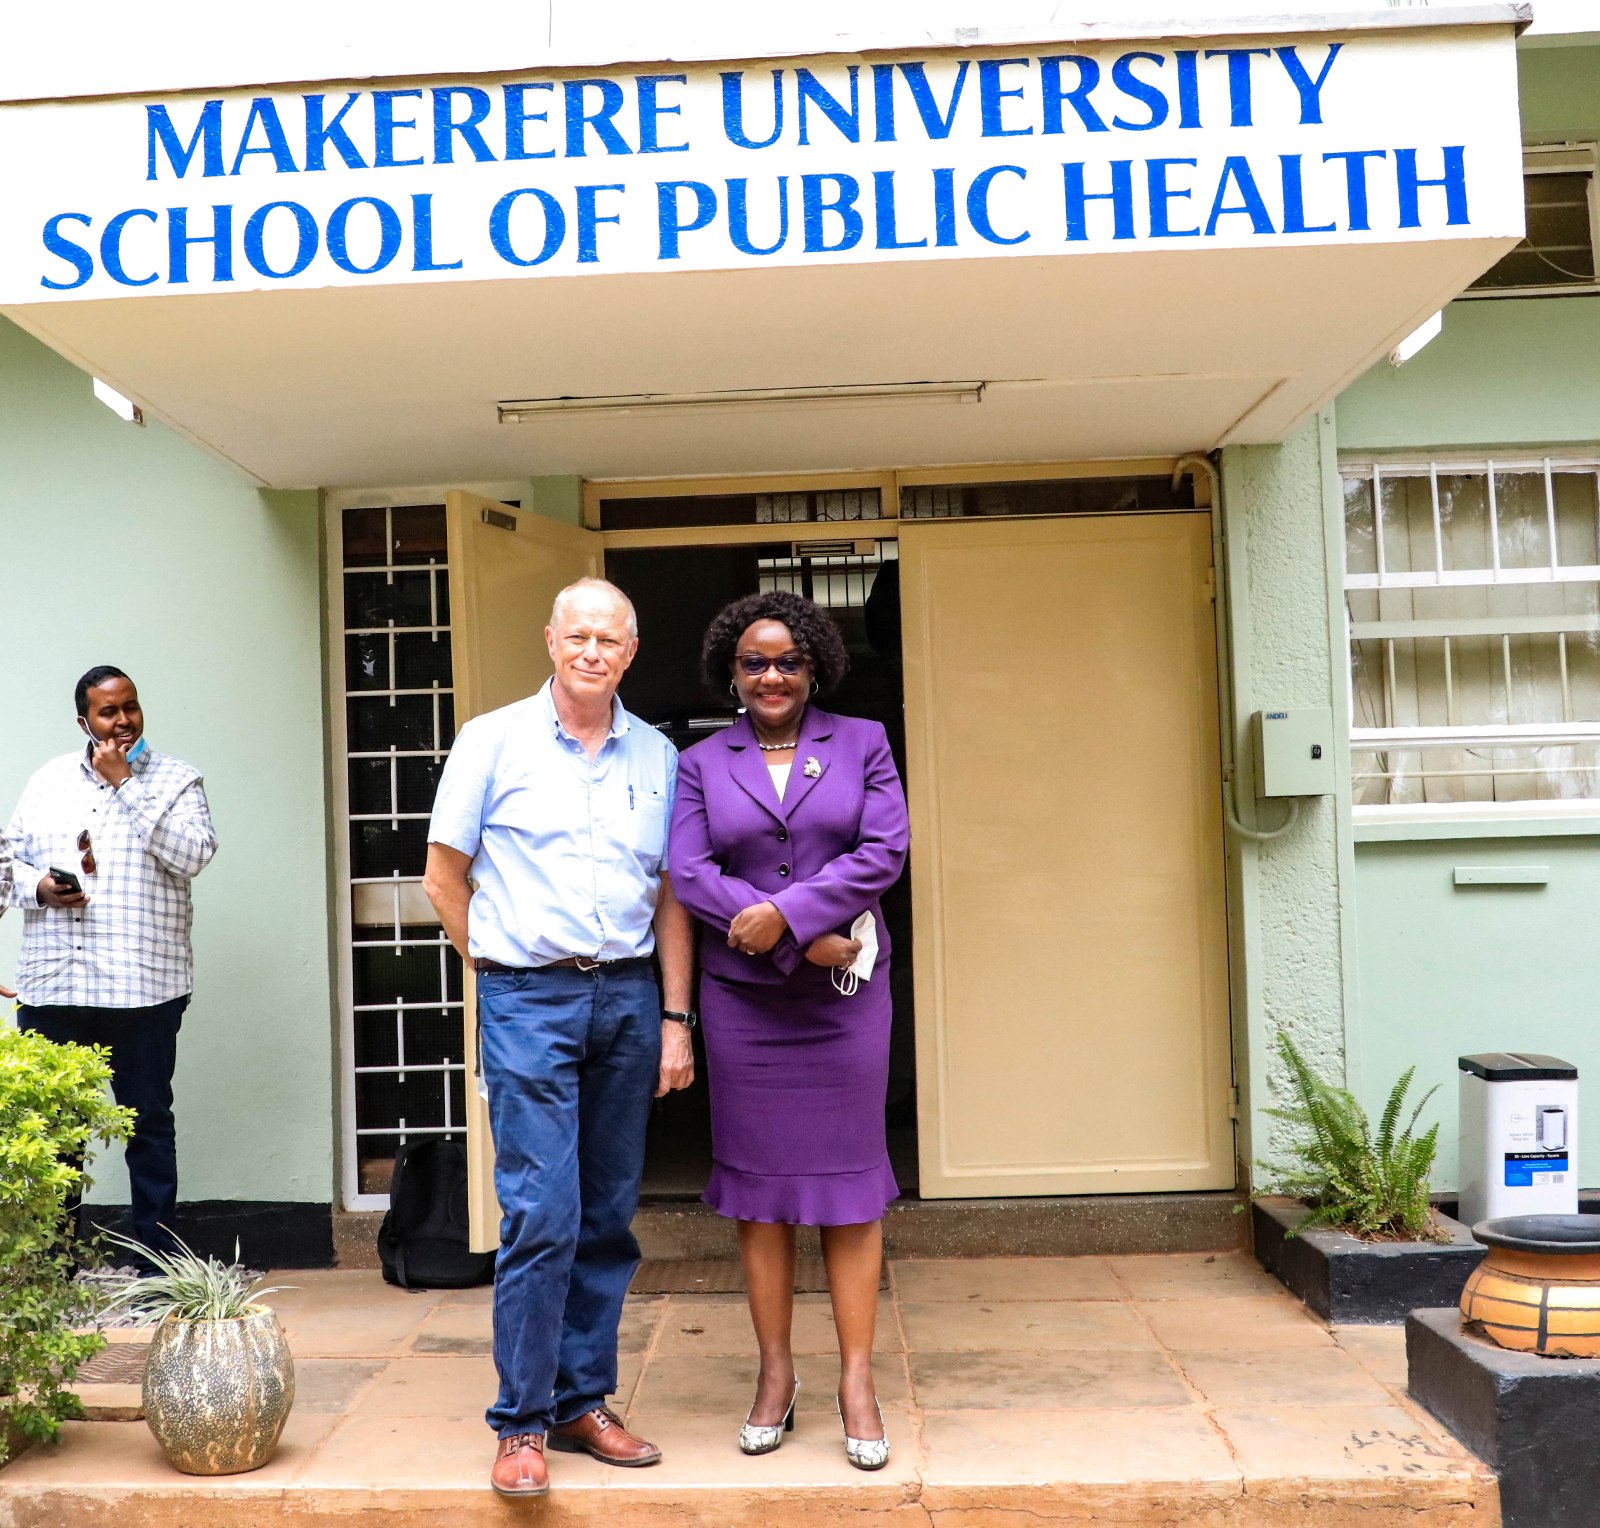 The Dean MakSPH-Prof. Rhoda Wanyenze (R) with Prof. Stefan Swartling Peterson during a visit by the team from Karolinska Institutet on 21st March 2022, Makerere University.